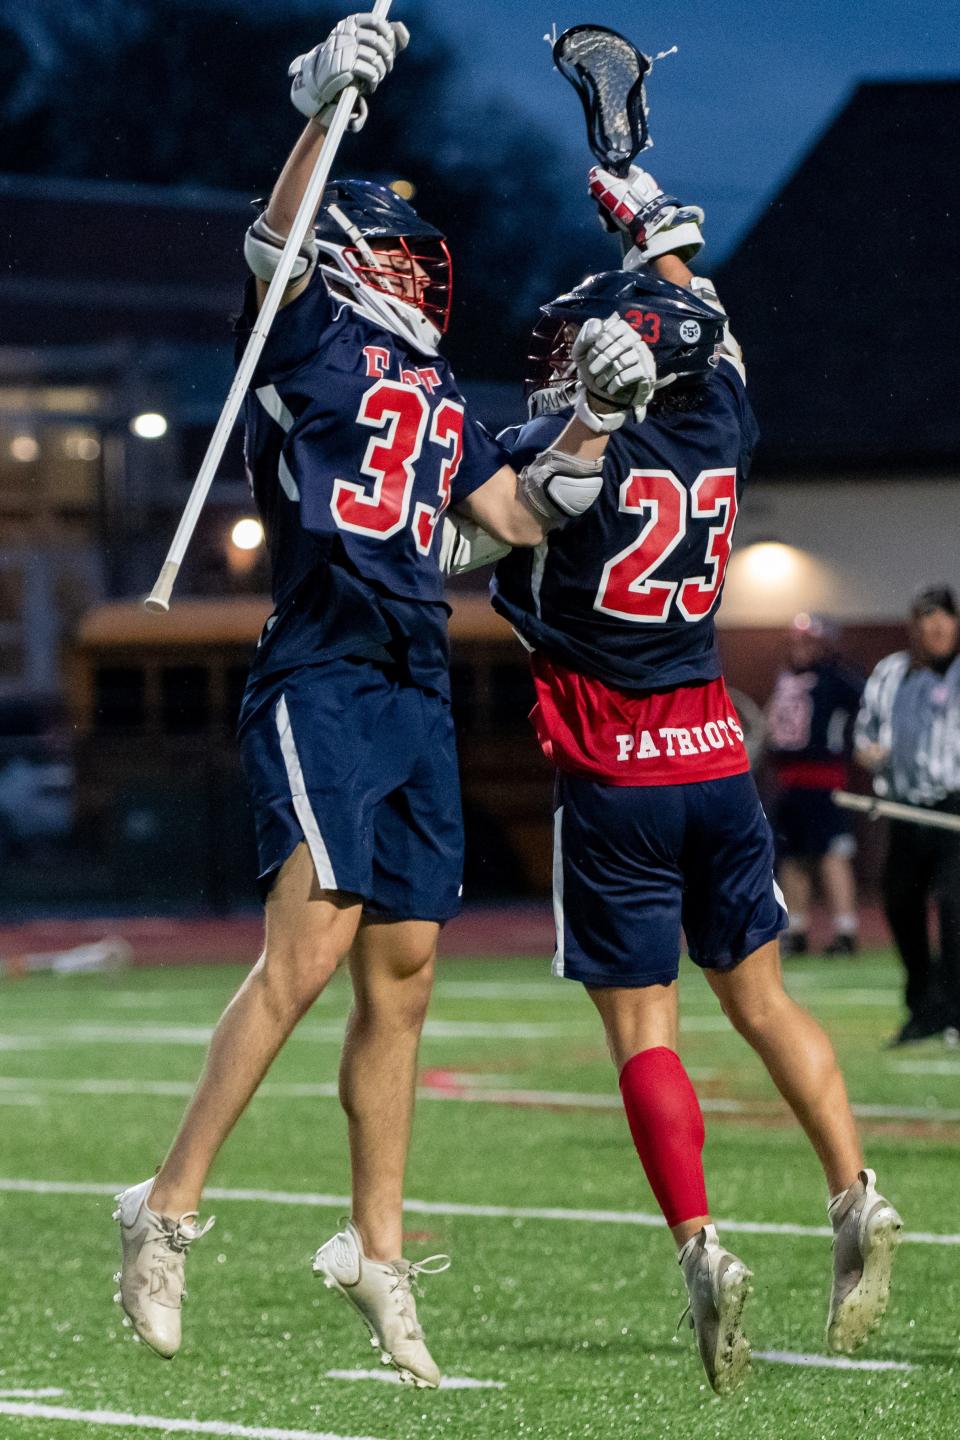 Central Bucks East's Ethan Greenlee, left, and Nicholas Knepp celebrate a goal in a boys lacrosse game against Central Bucks West at Central Bucks West High School in Doylestown, on Tuesday, April 26, 2022. The Patriots defeated the Bucks 13-7.